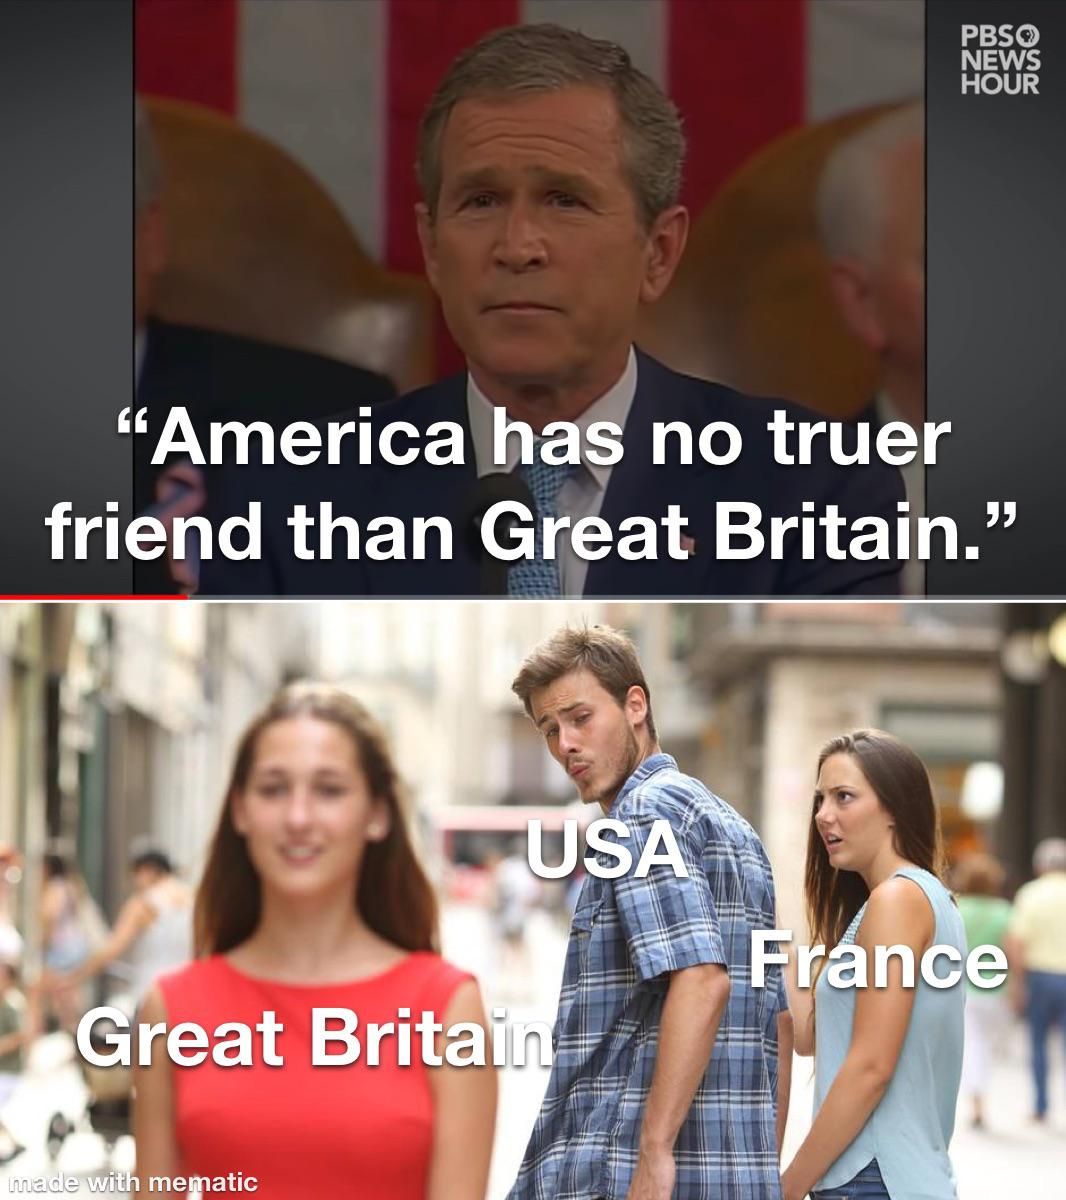 Was listening to Bush’s post 9/11 speech and though of this.